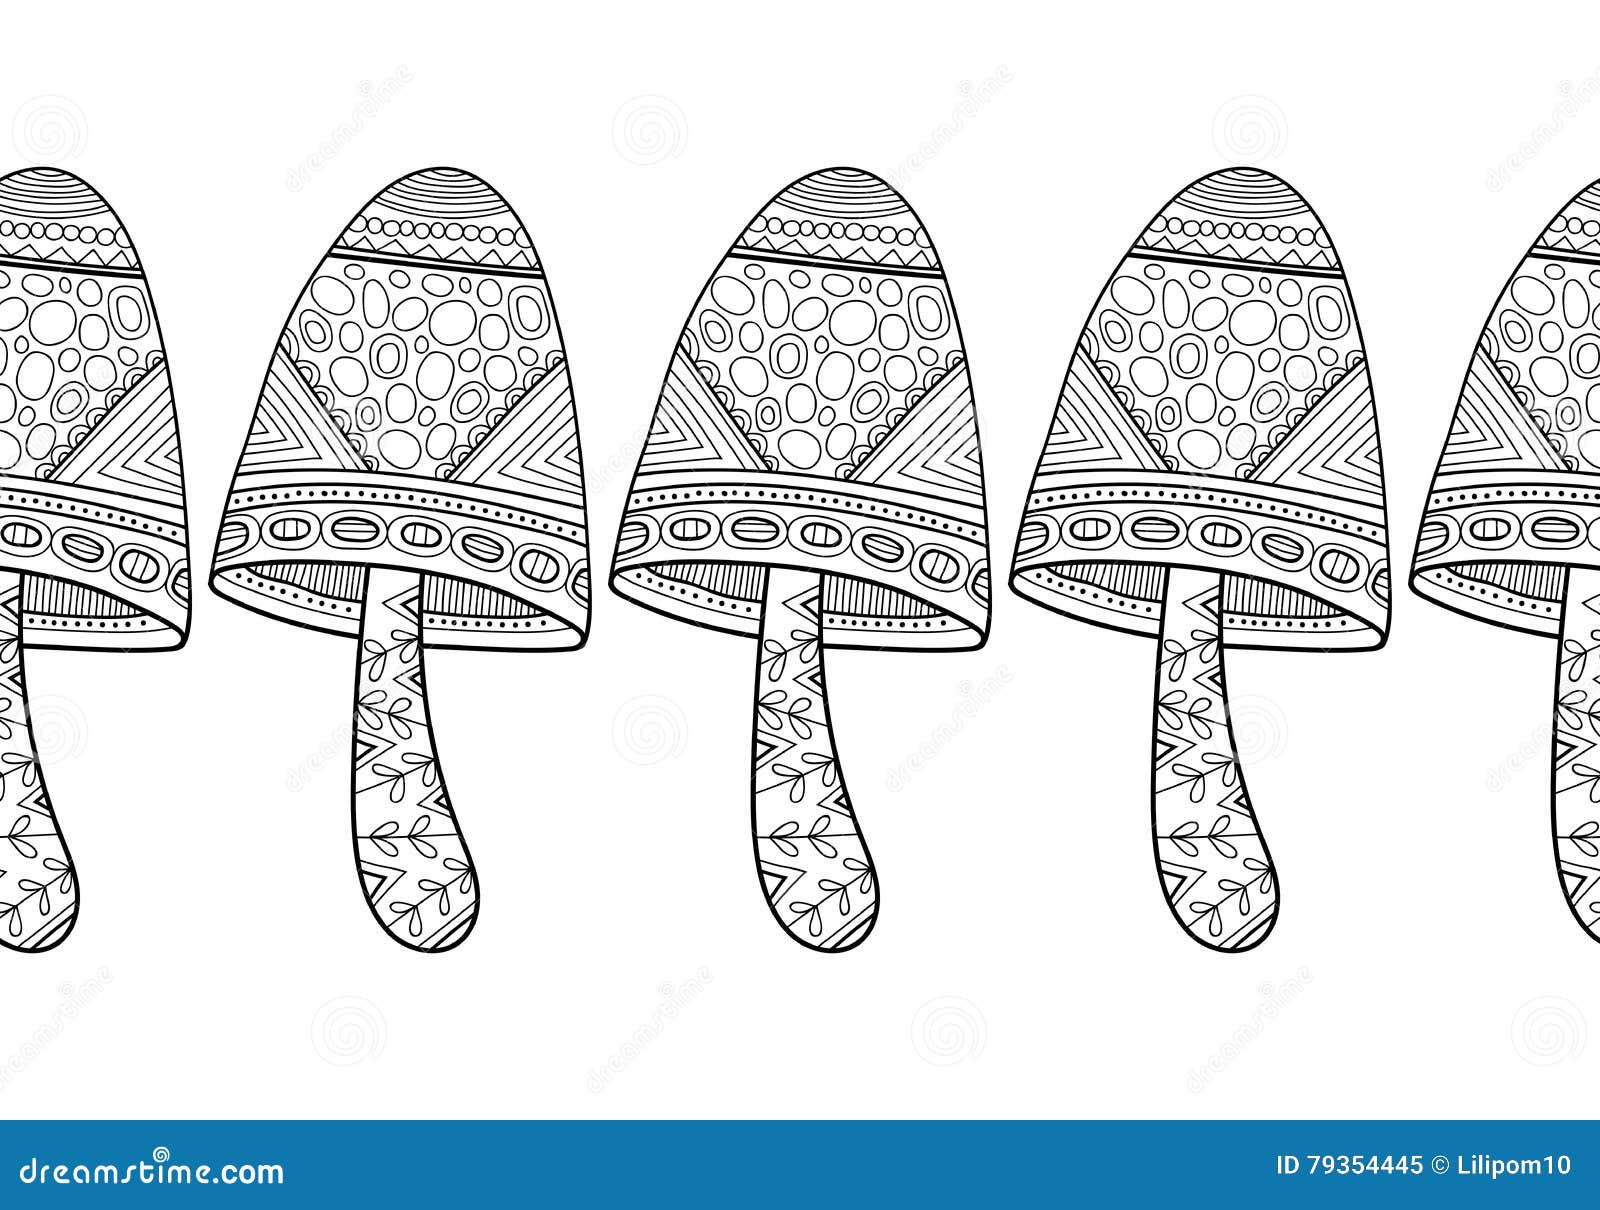 Download Black And White Decorative Mushrooms For Scrapbooking Greeting Cards Stock Vector Illustration